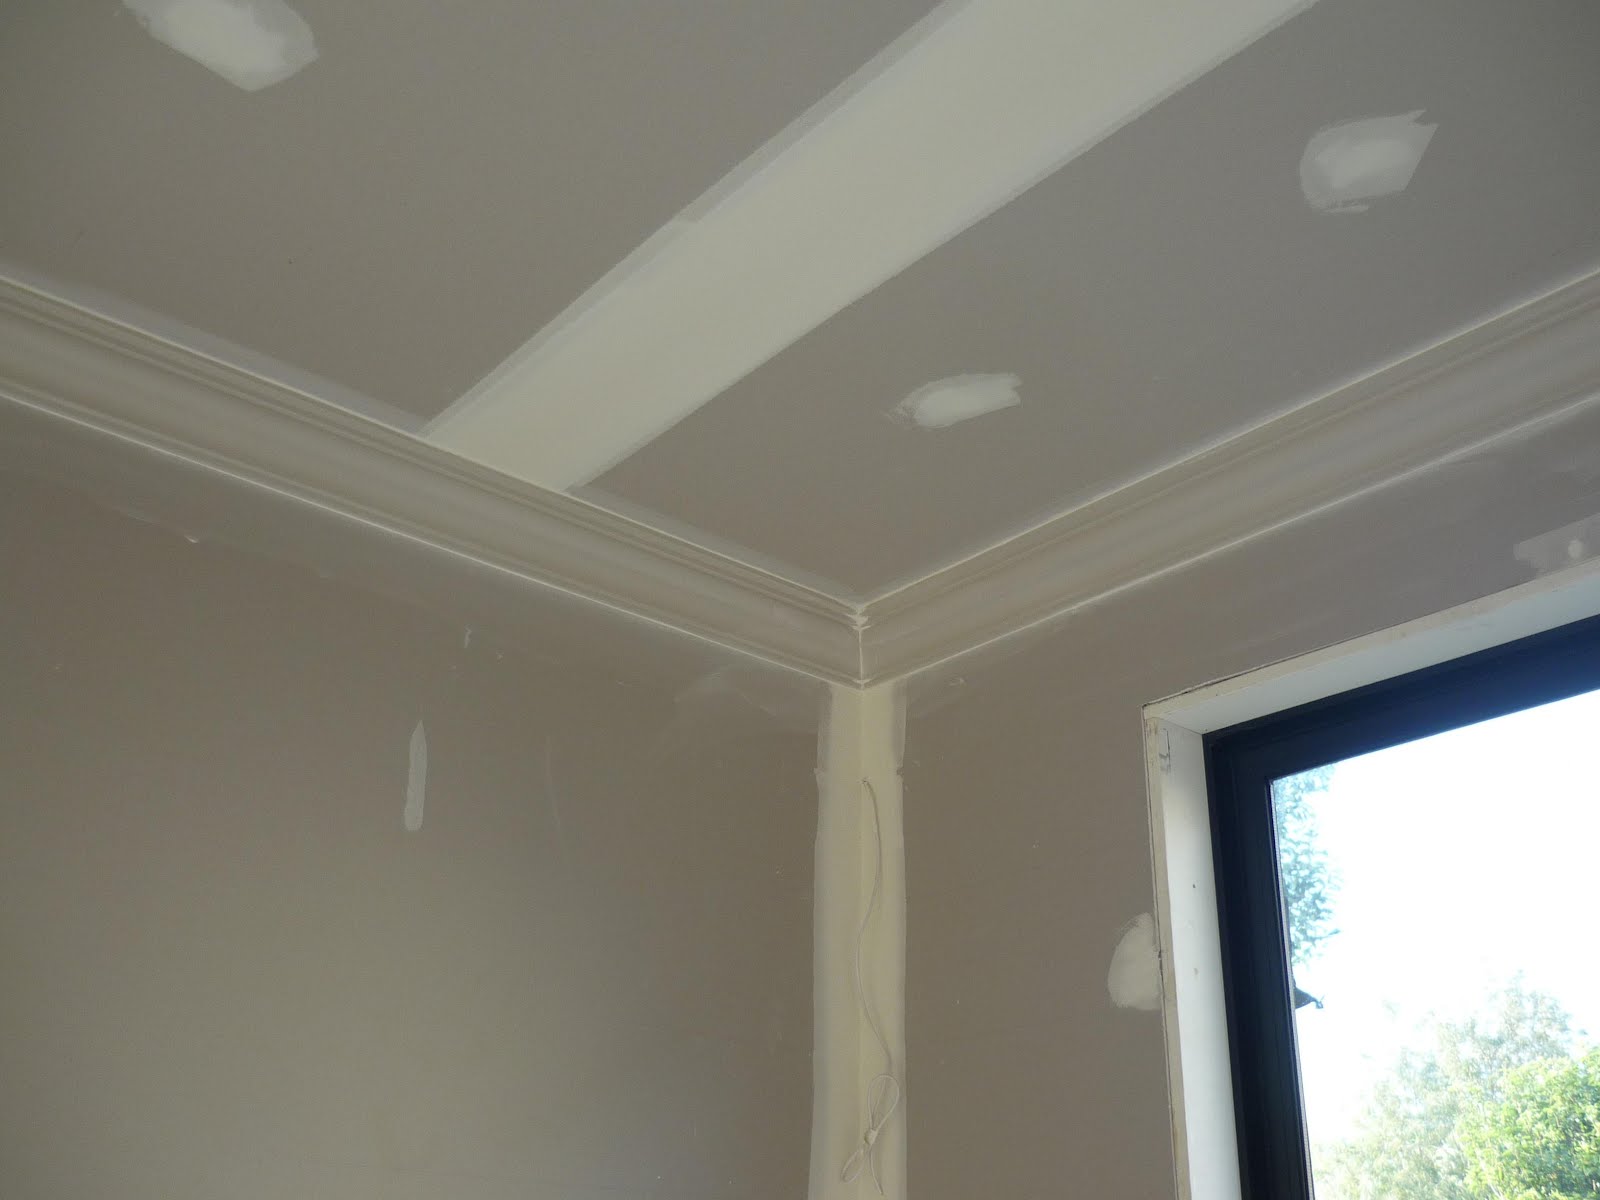 Building A House From Scratch Cornices